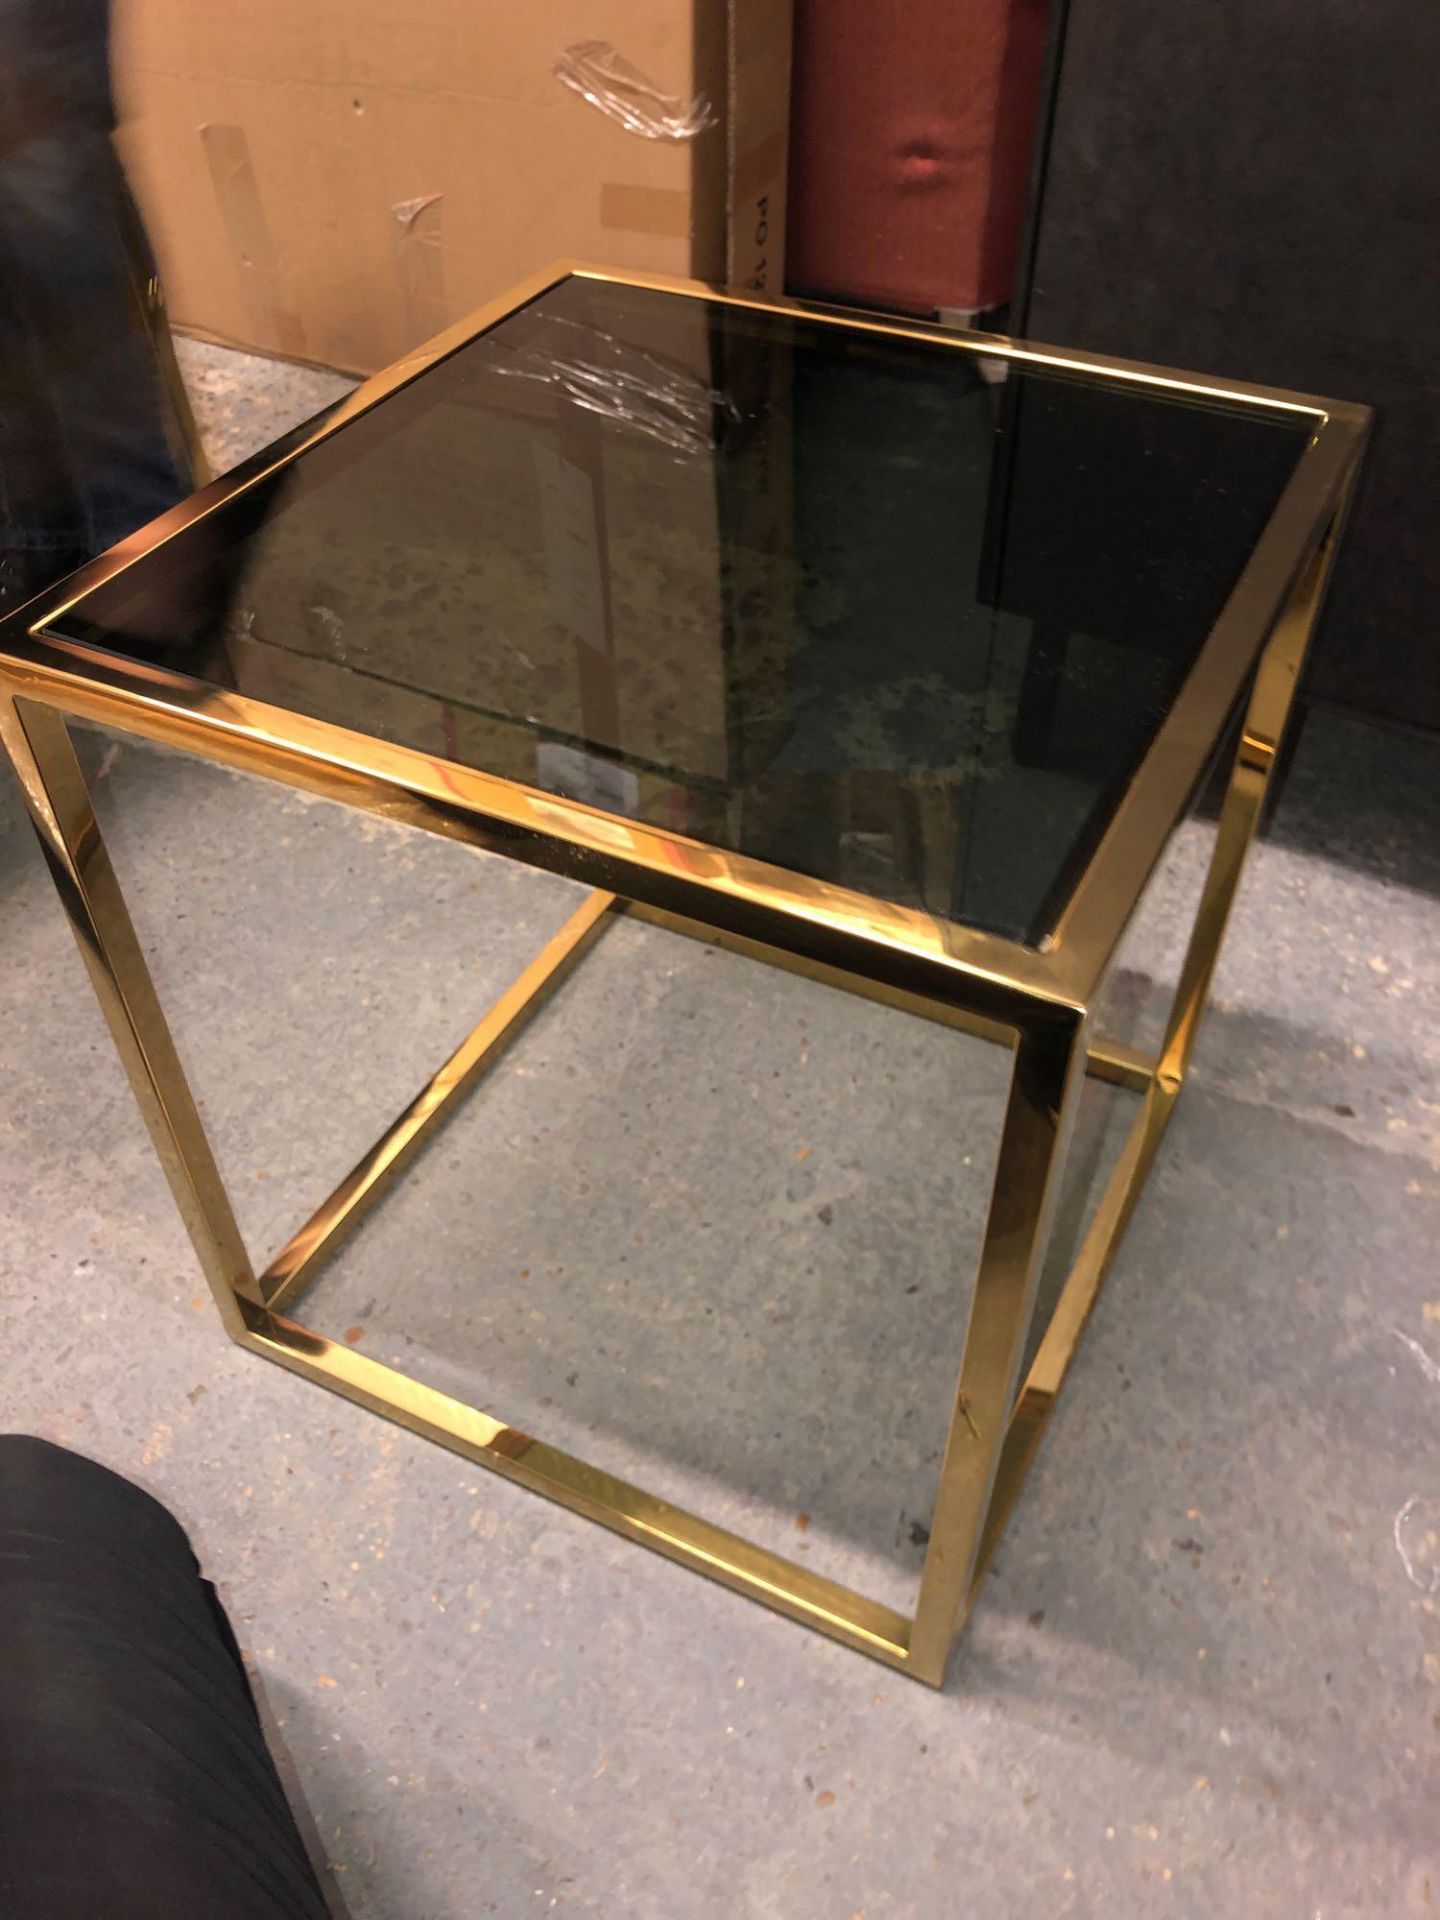 Santorino Side Table Gold 470 X 470 X 500mm This Simple Yet Sophisticated Side Table Is The - Image 2 of 2